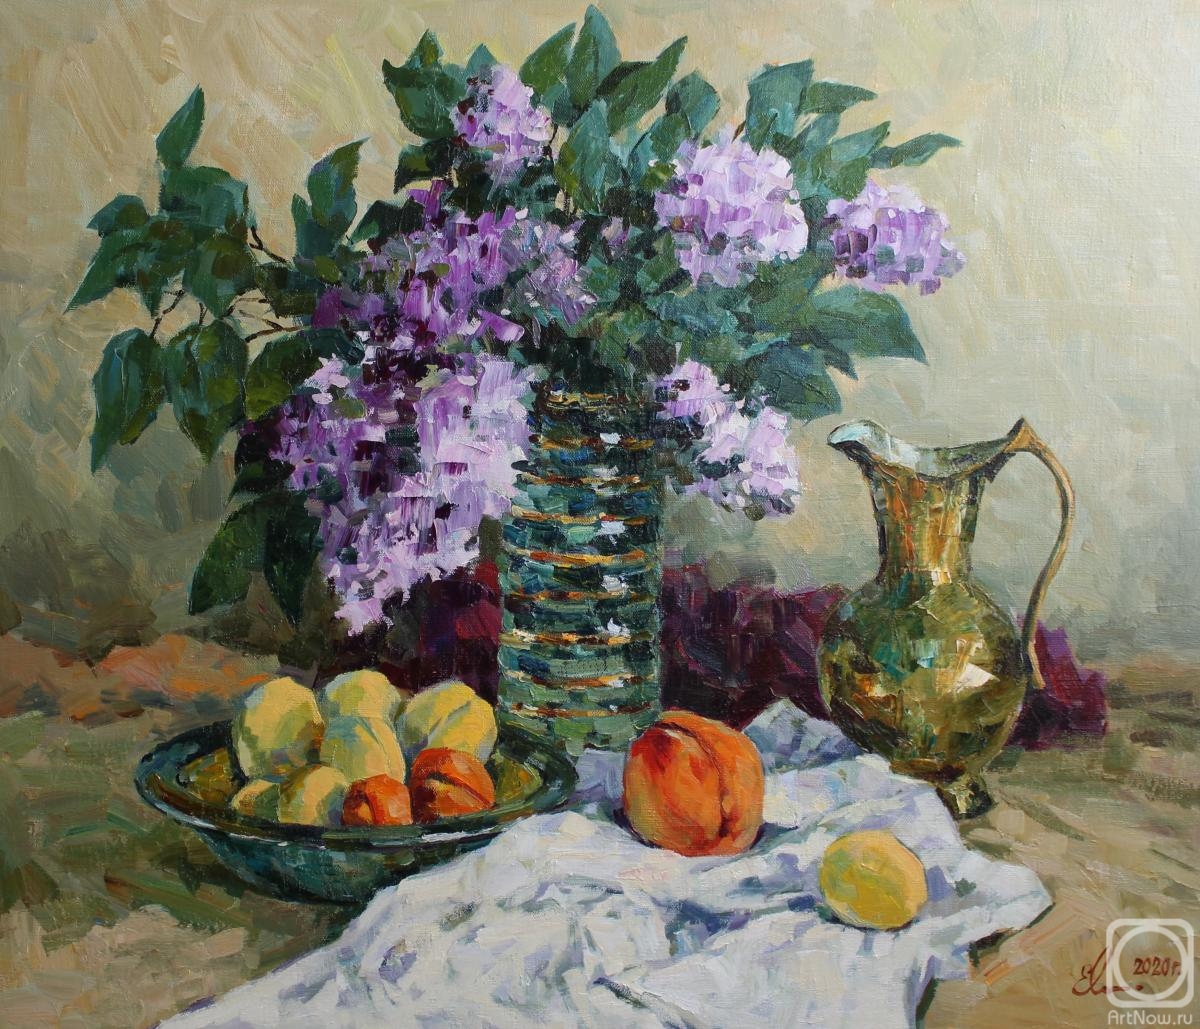 Malykh Evgeny. Lilac and fruits